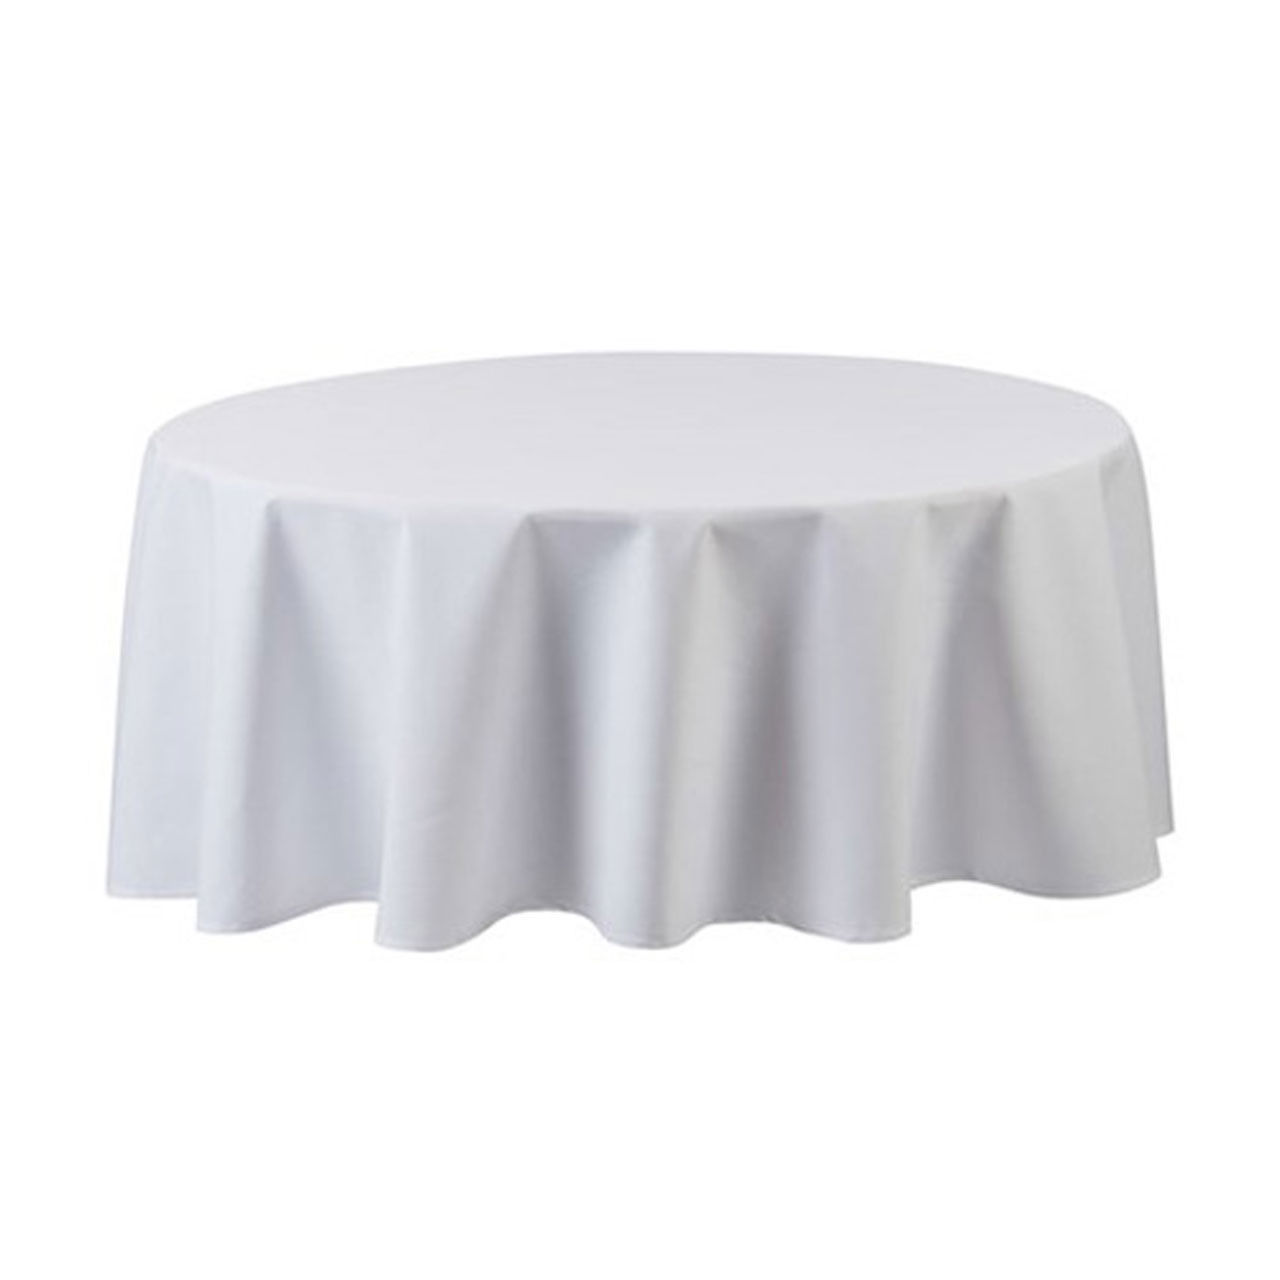 Why is a 90 round tablecloth like Seamless White 90" Rounds ideal for restaurant use?